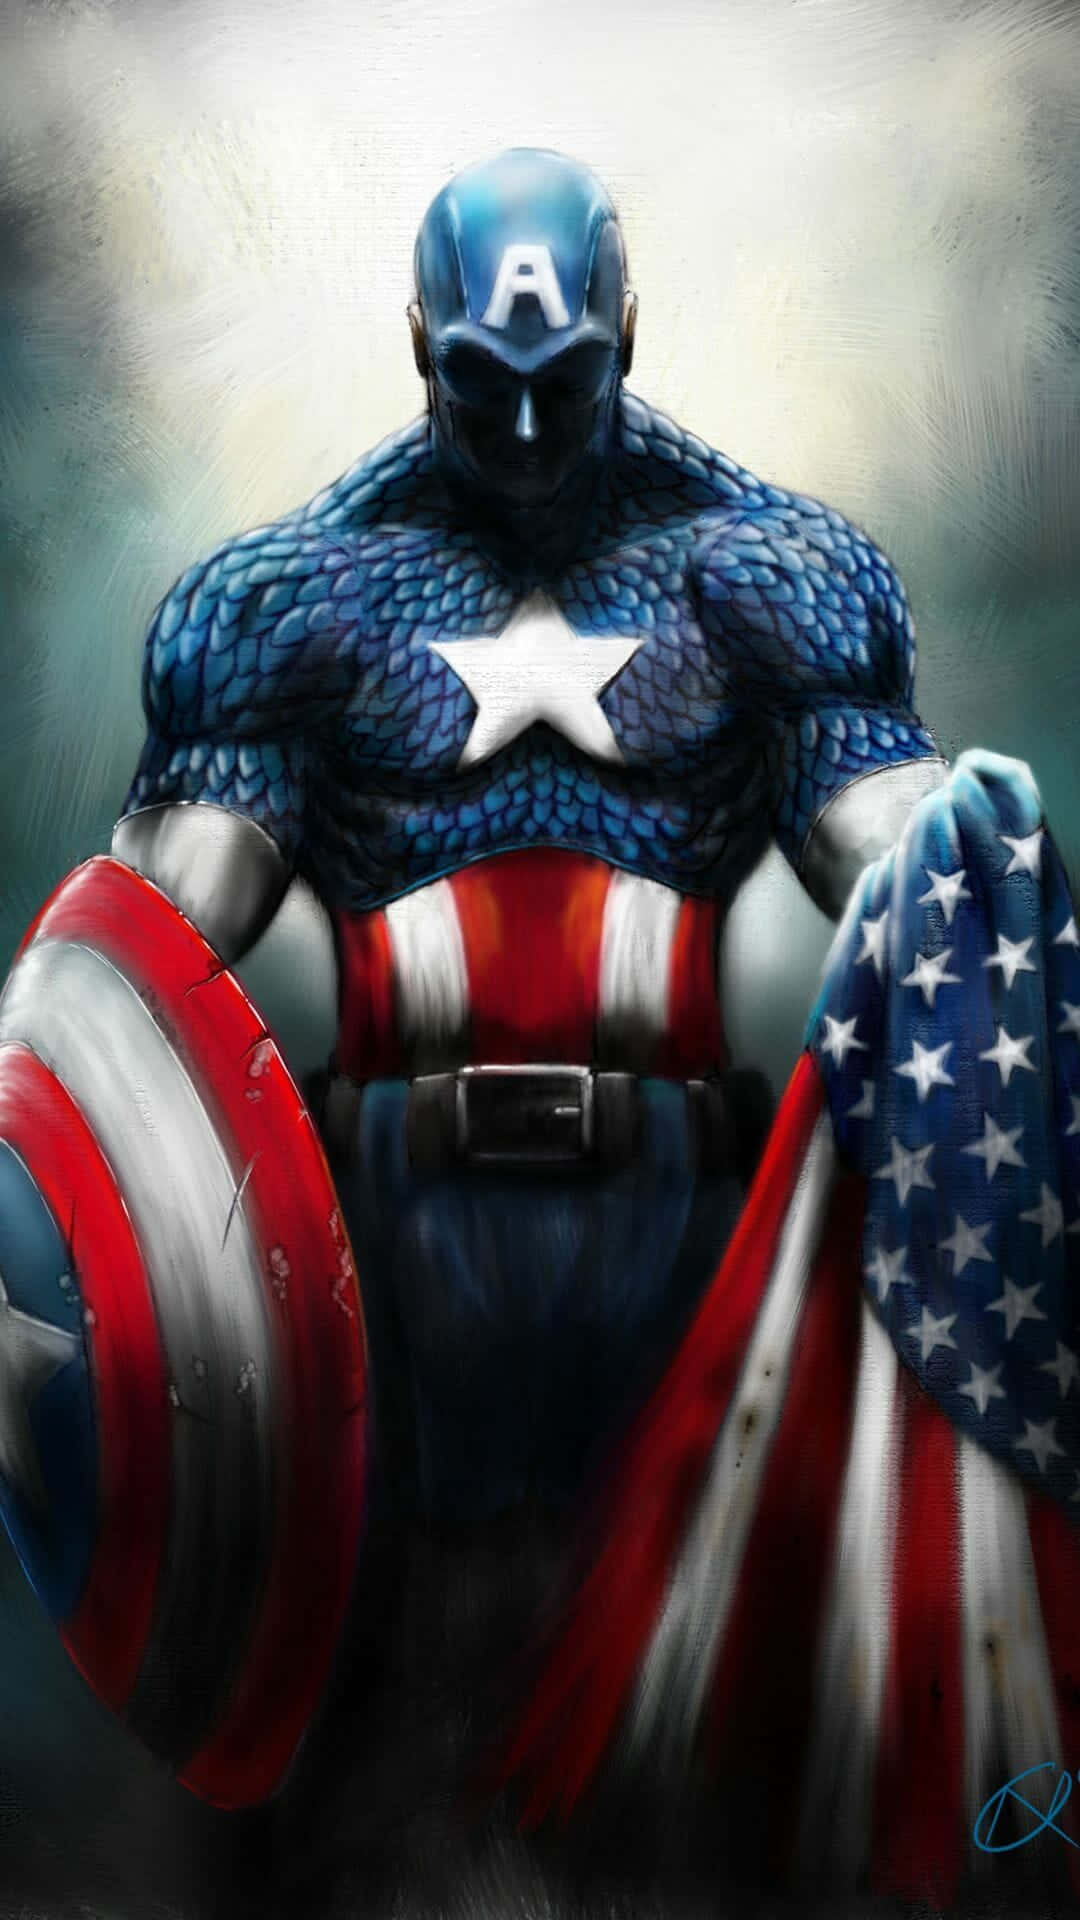 Captain America-themed Android Smartphone Wallpaper